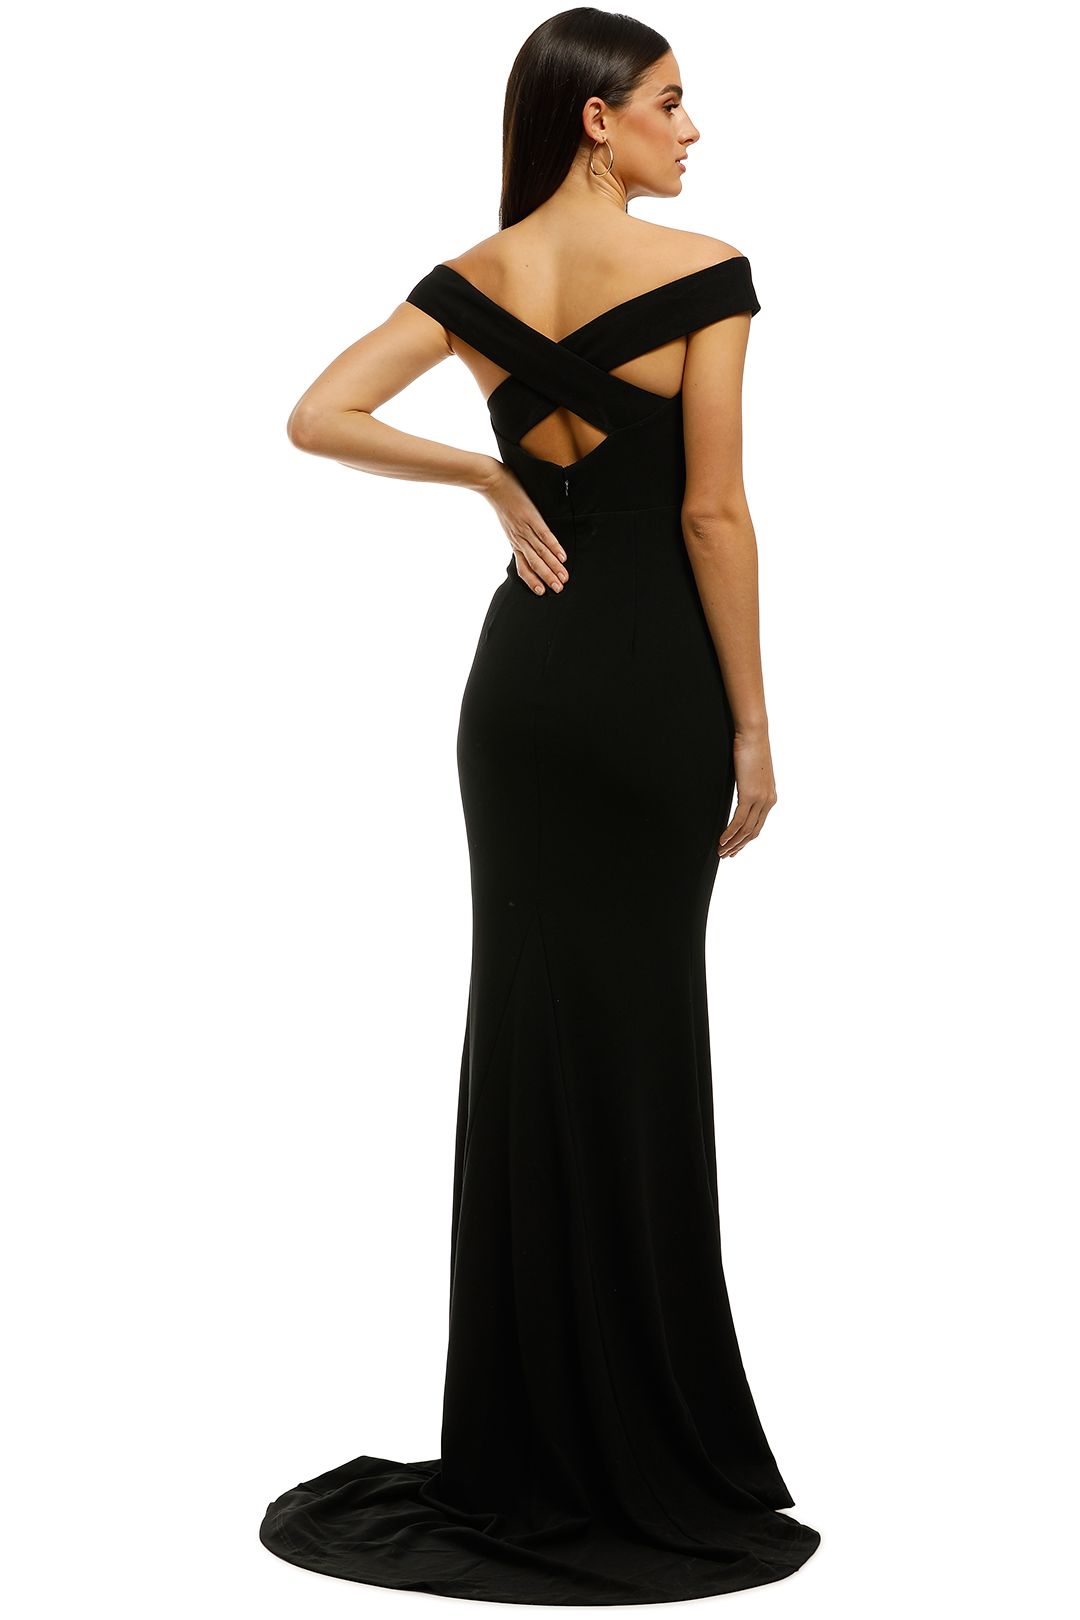 Thompson Gown in Black by Samantha Rose for Hire | GlamCorner